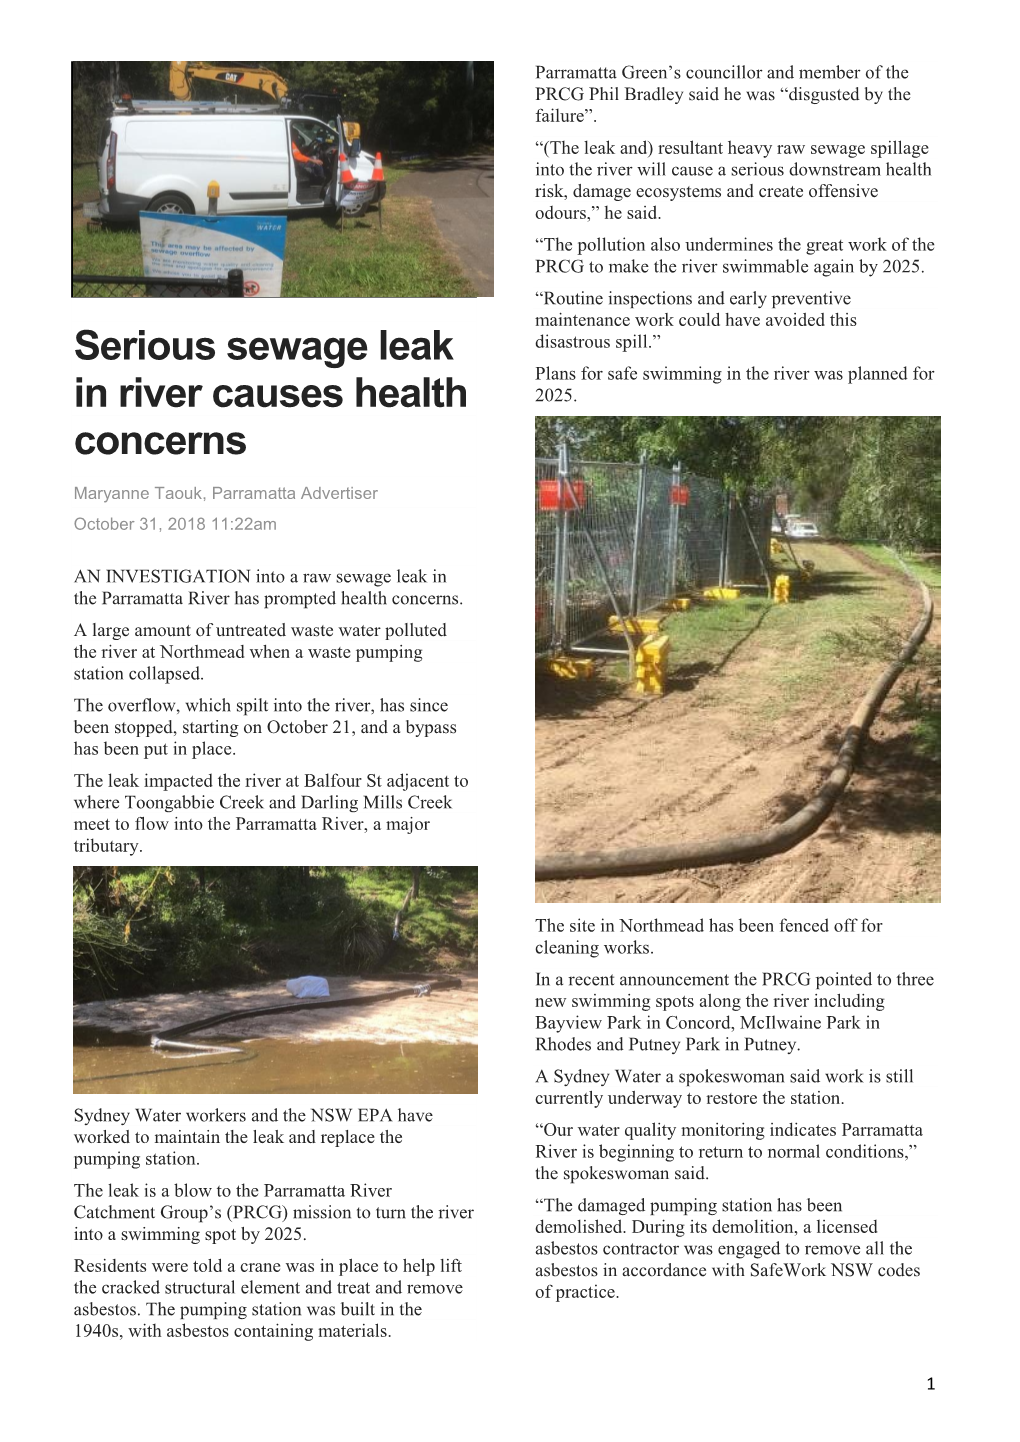 Serious Sewage Leak in River Causes Health Concerns